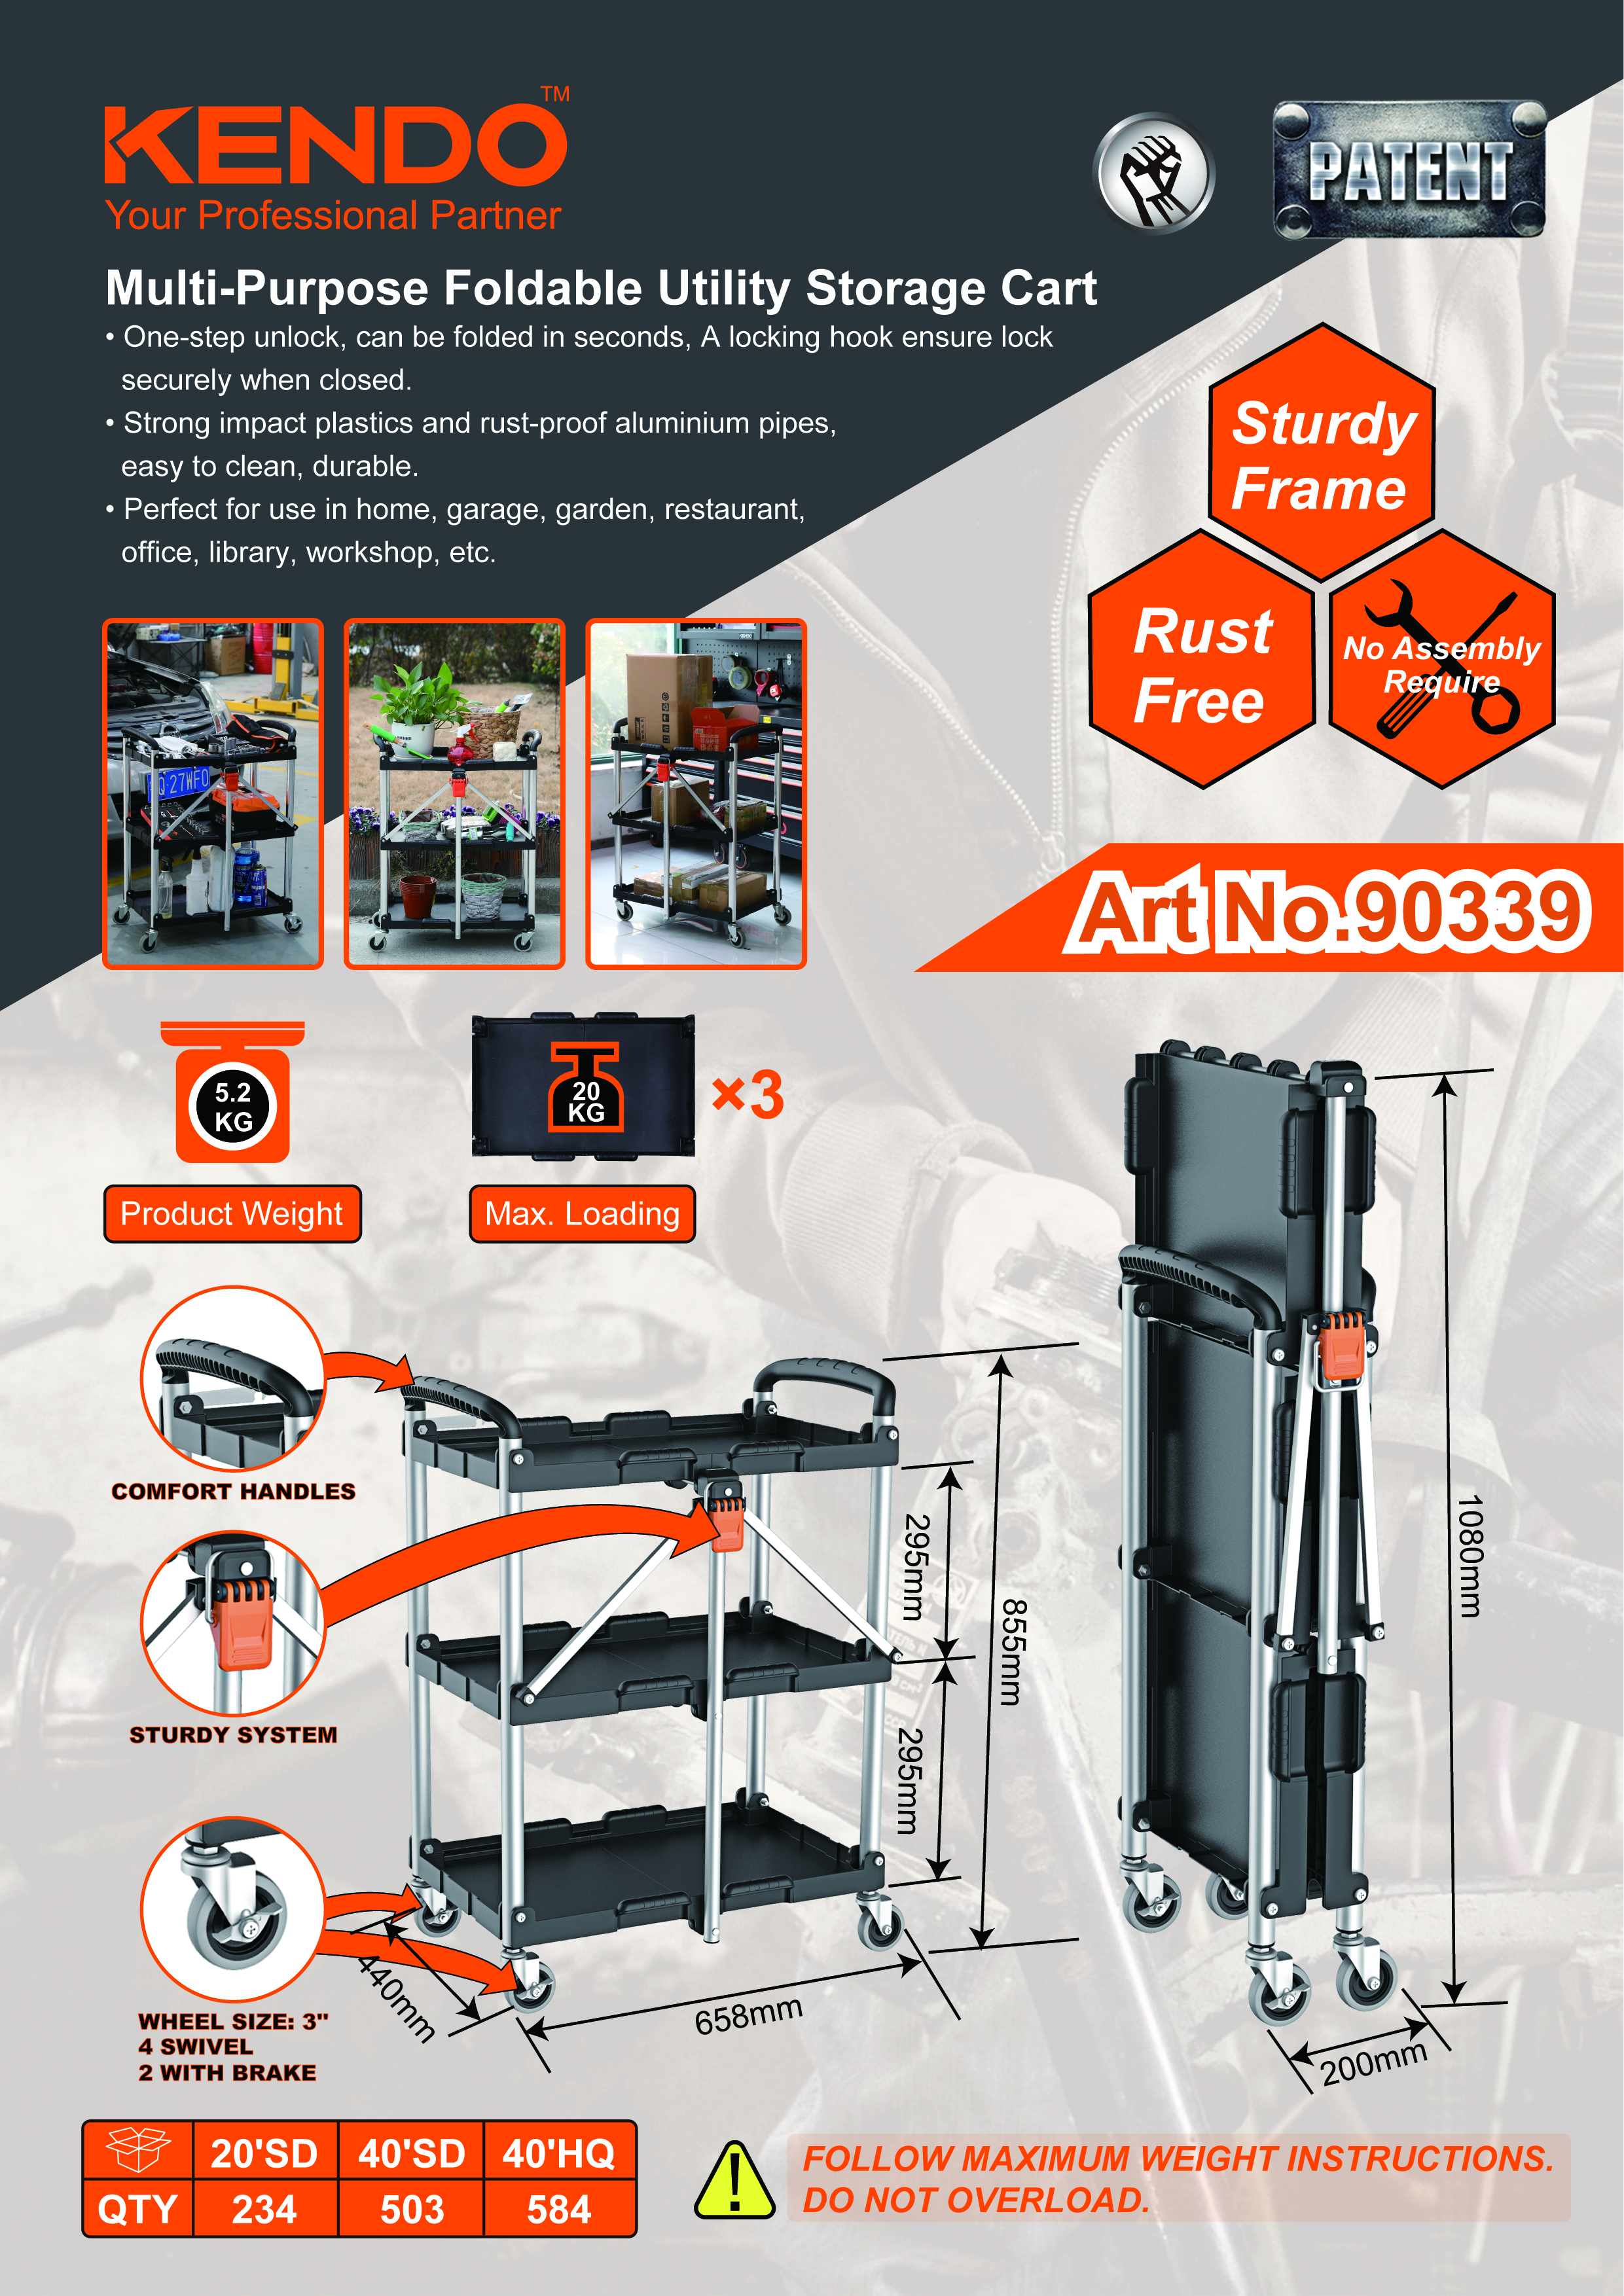 What are the advantages of the Foldable Utility Storage Cart?